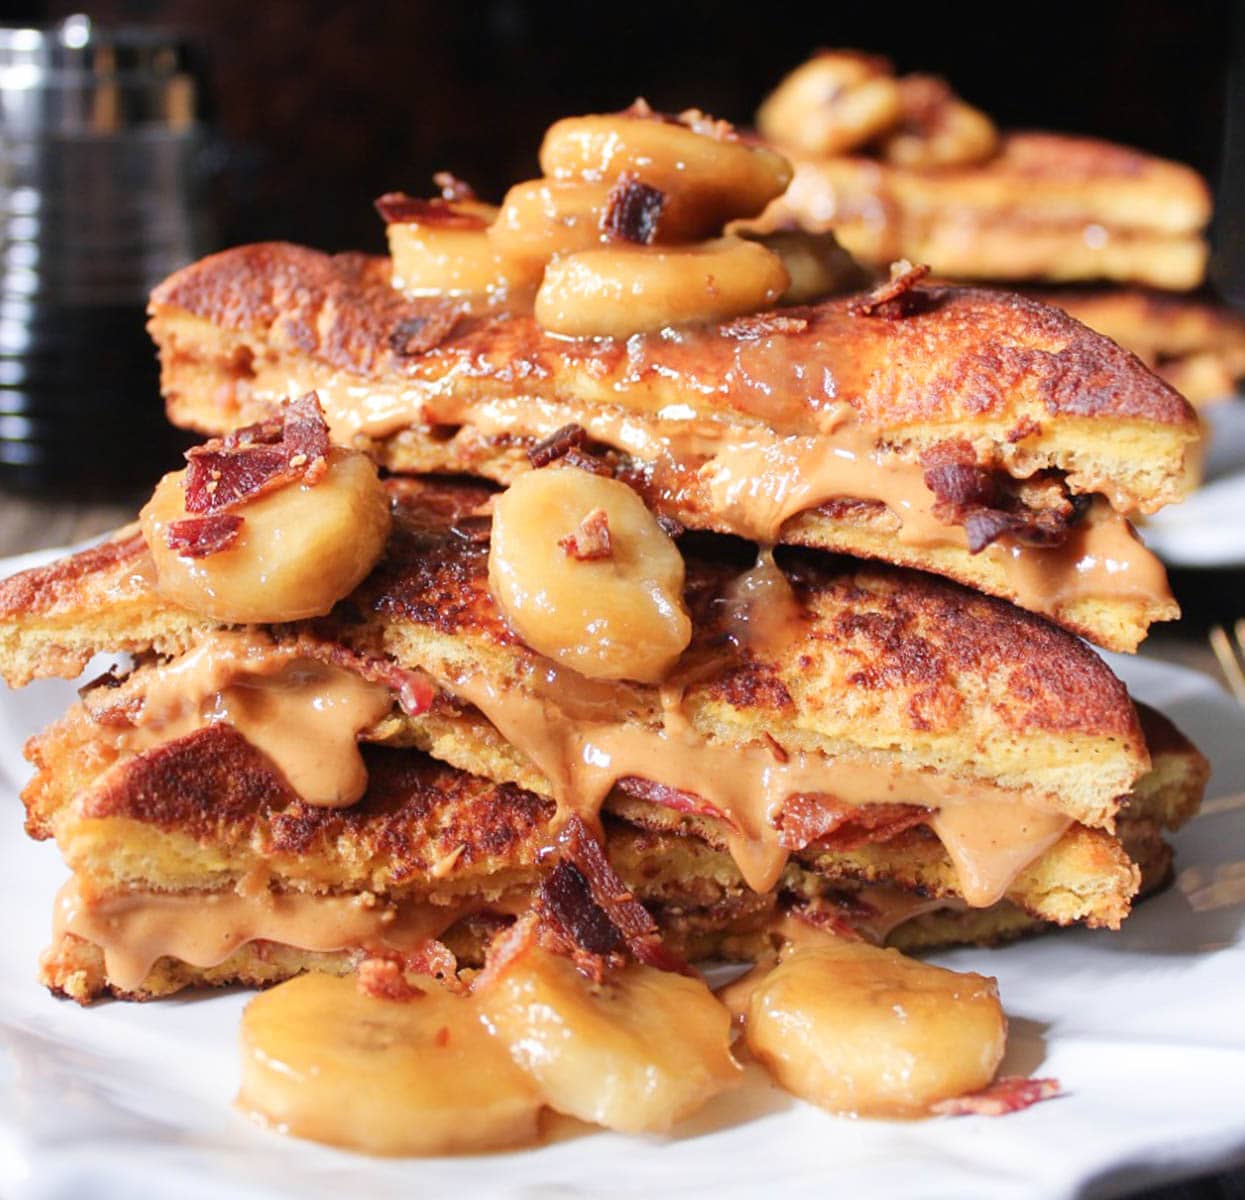 peanut-butter-and-bacon-stuffed-french-toast-with-caramelized-bananas-7